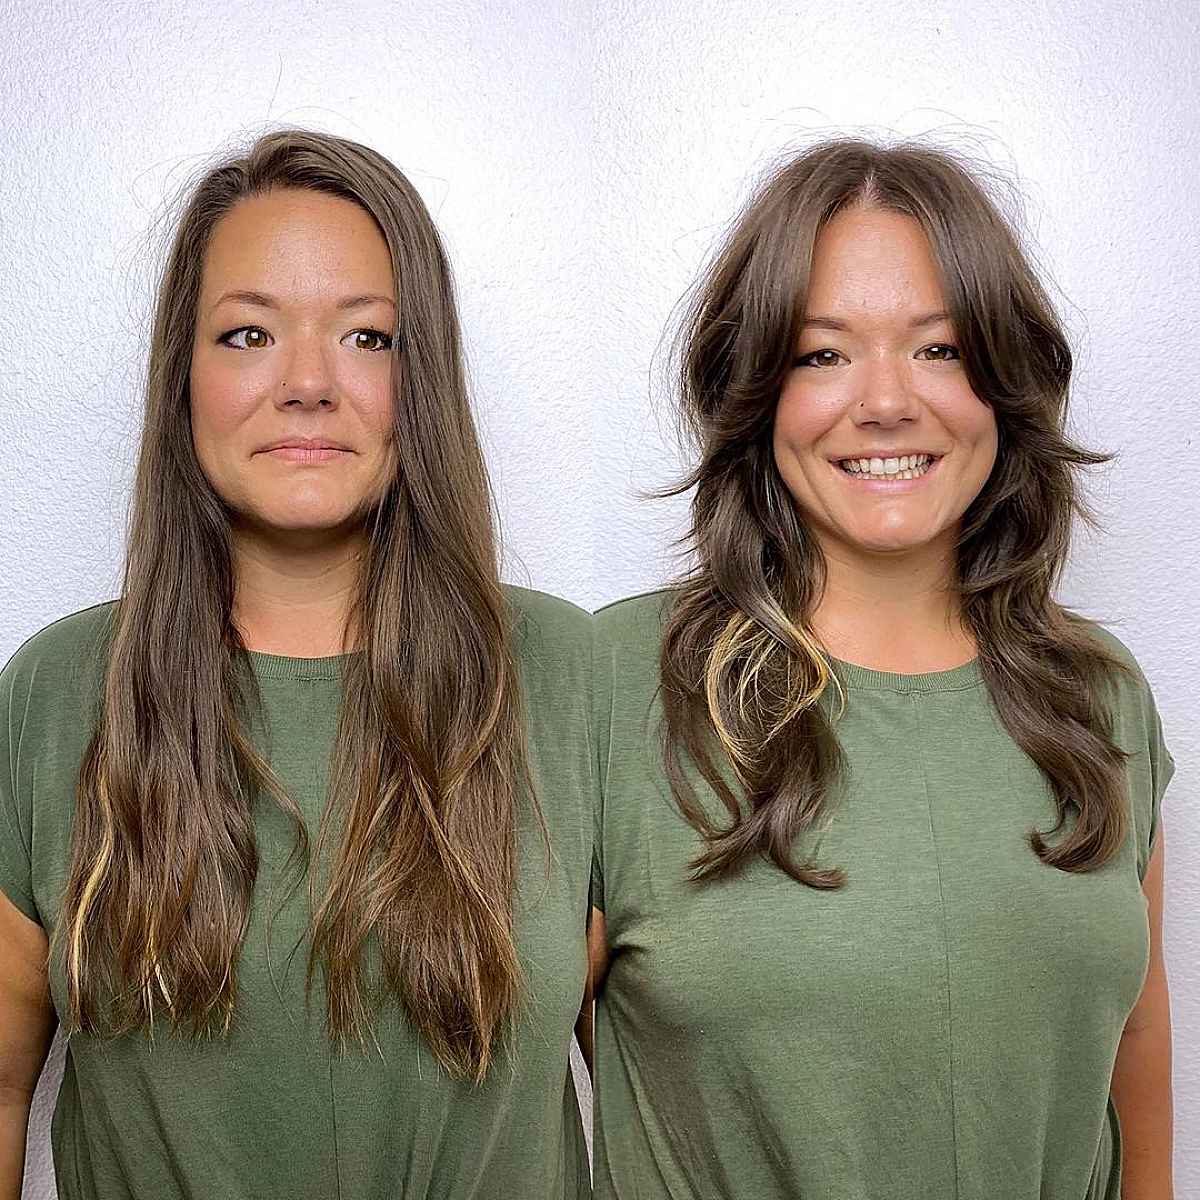 15 Slimming Long Layered Haircuts for Women with Full Faces